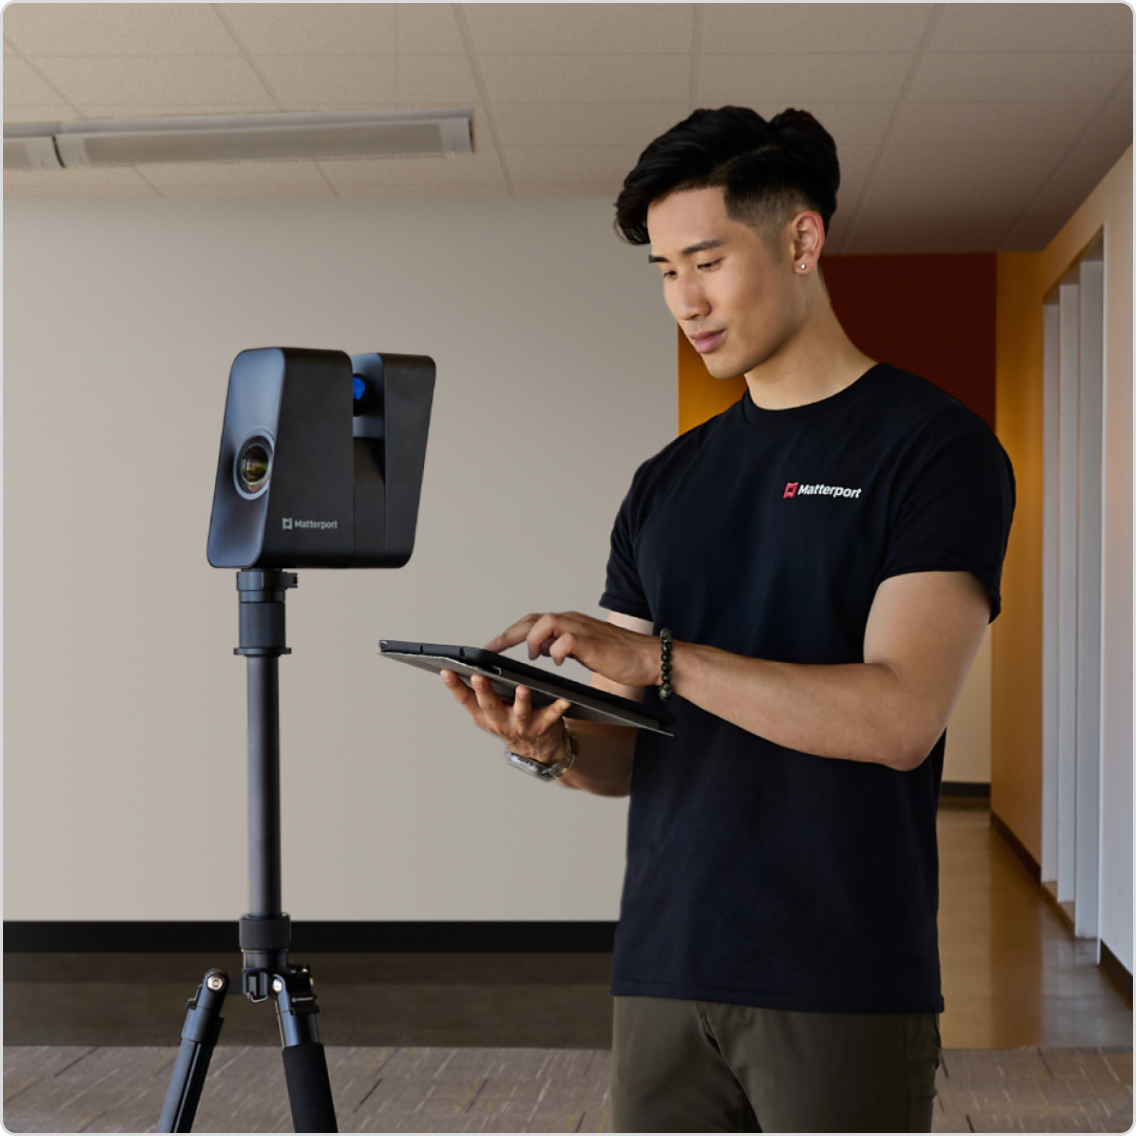 A man scanning a space with a Matterport Pro3 camera